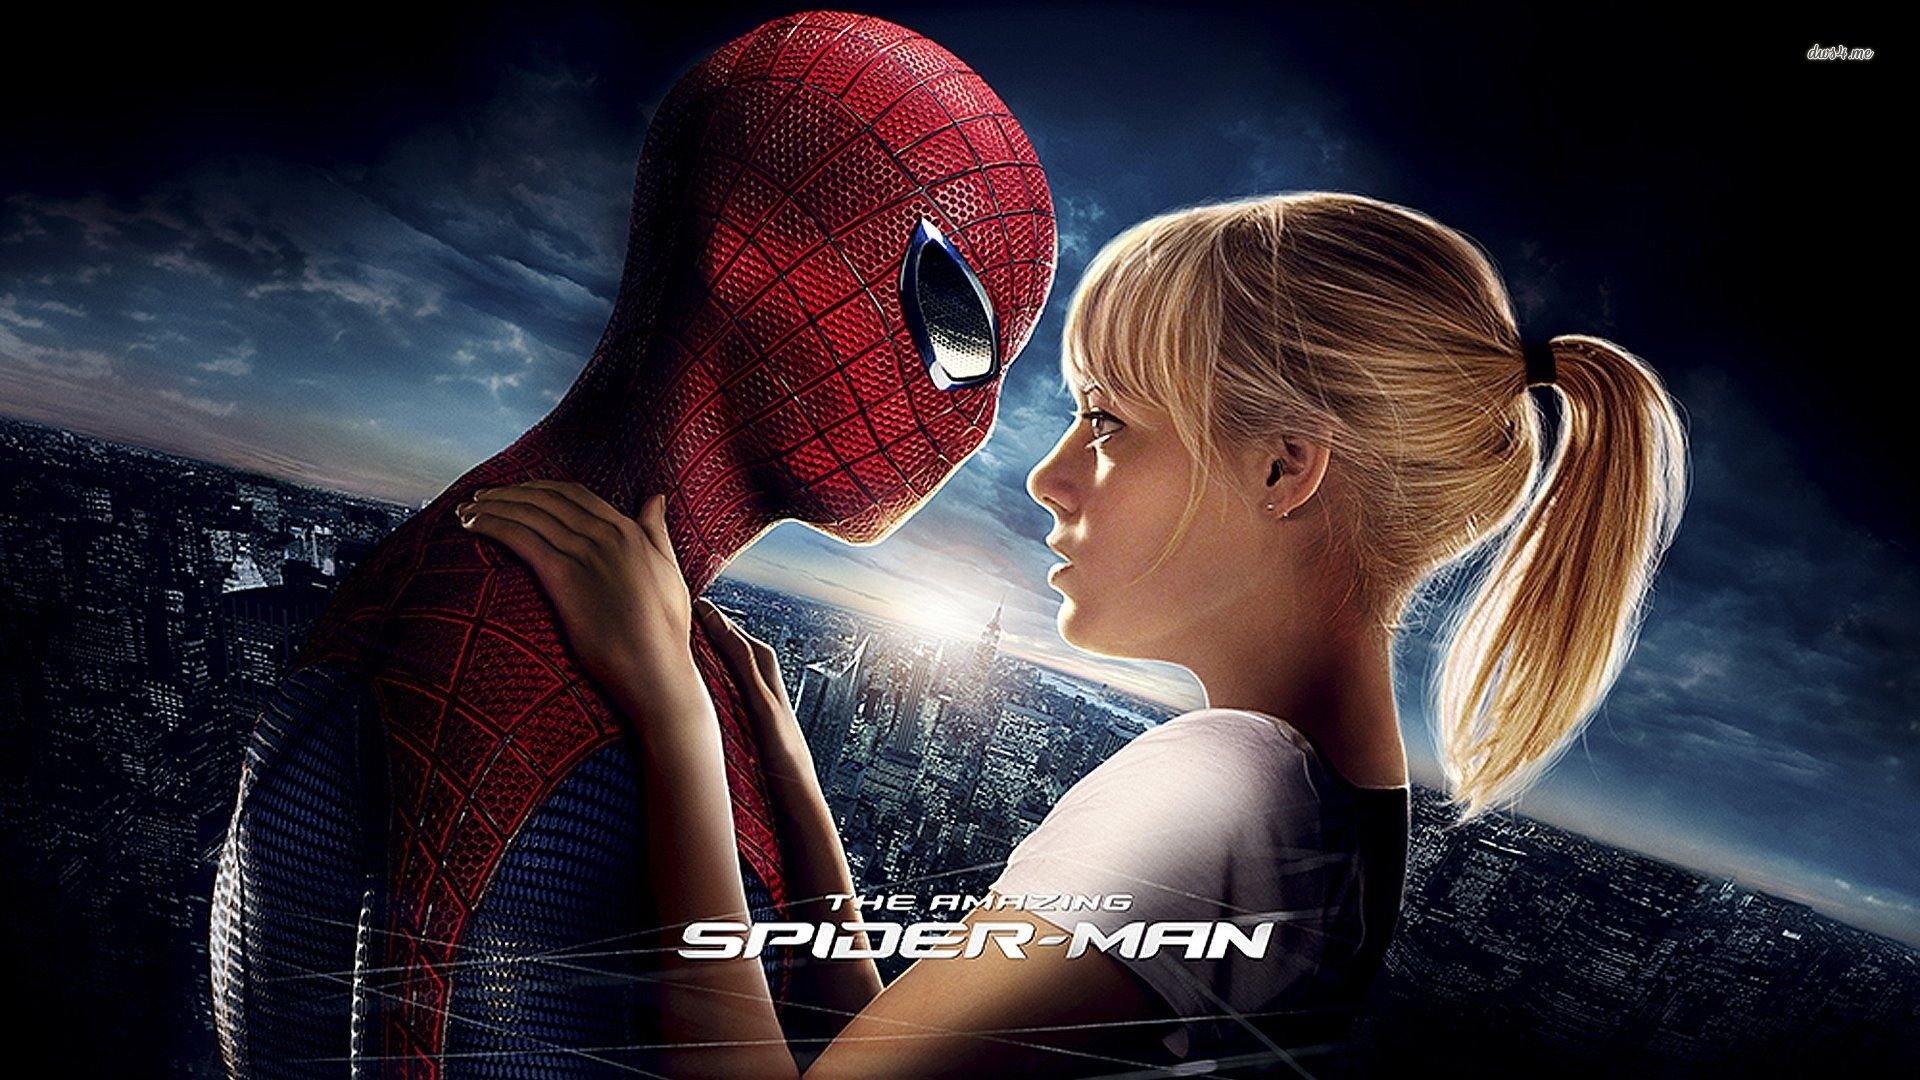 The Amazing Spider-Man wallpaper - Movie wallpapers - #20935